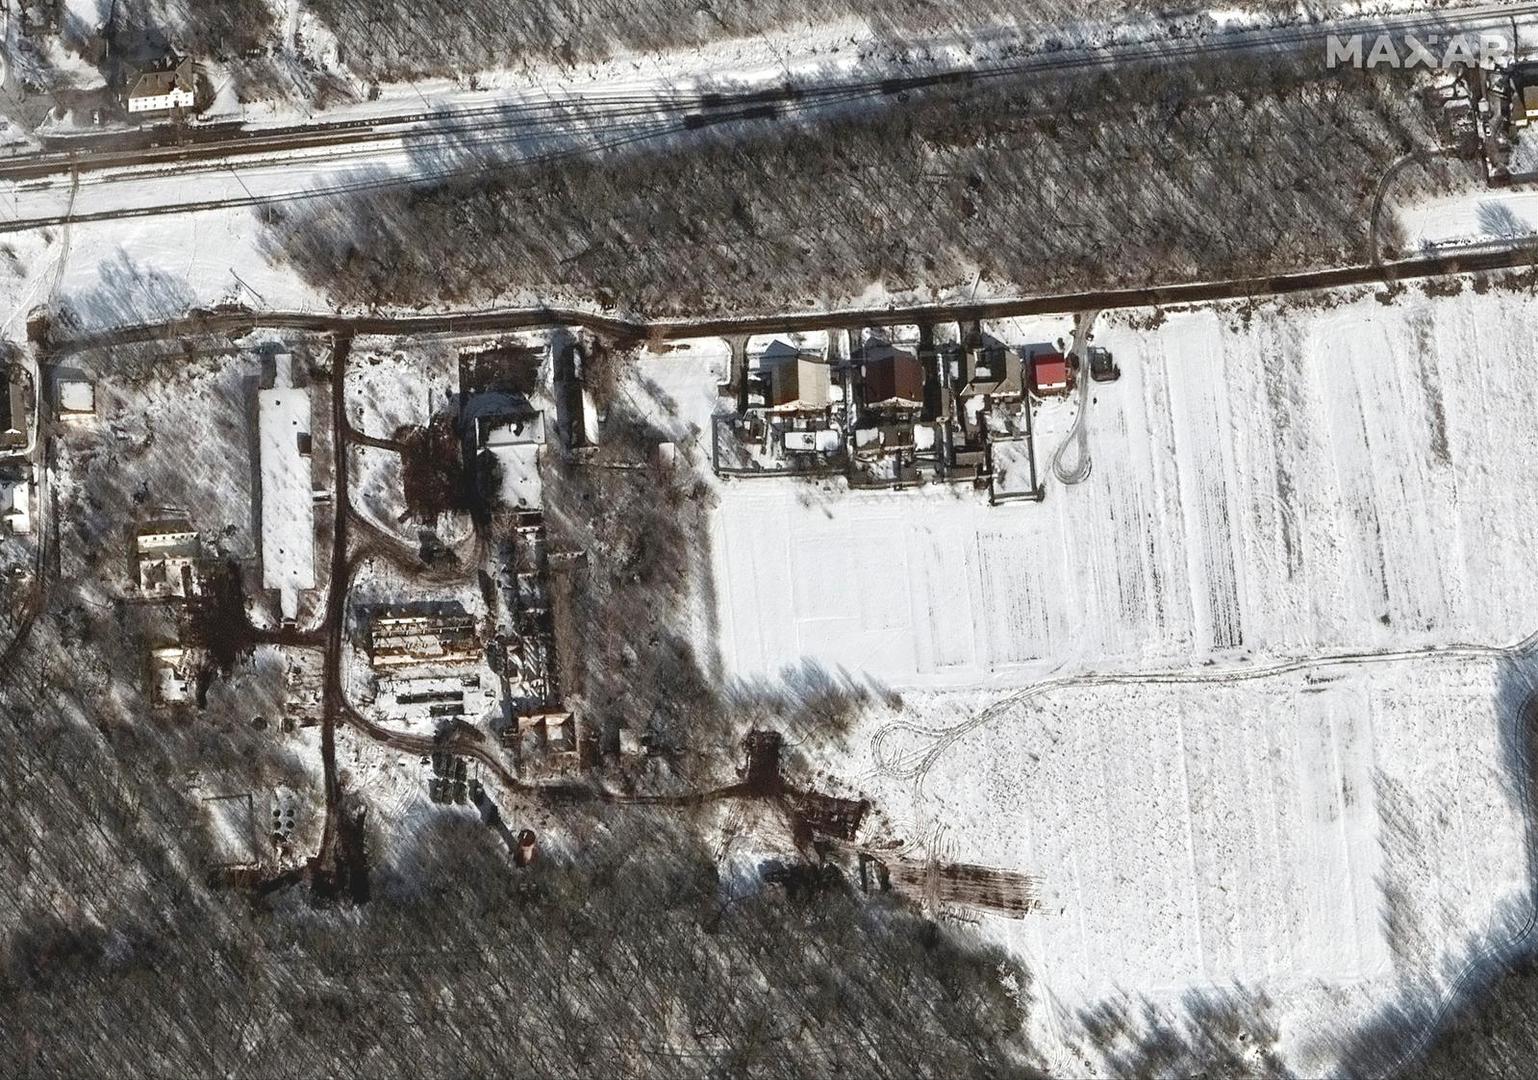 A satellite image shows deployment in an industrial area, near Belgorod, Russia February 20, 2022. Maxar Technologies/Handout via REUTERS ATTENTION EDITORS - THIS IMAGE HAS BEEN SUPPLIED BY A THIRD PARTY. NO RESALES. NO ARCHIVES. MANDATORY CREDIT. DO NOT OBSCURE LOGO Photo: MAXAR TECHNOLOGIES/REUTERS